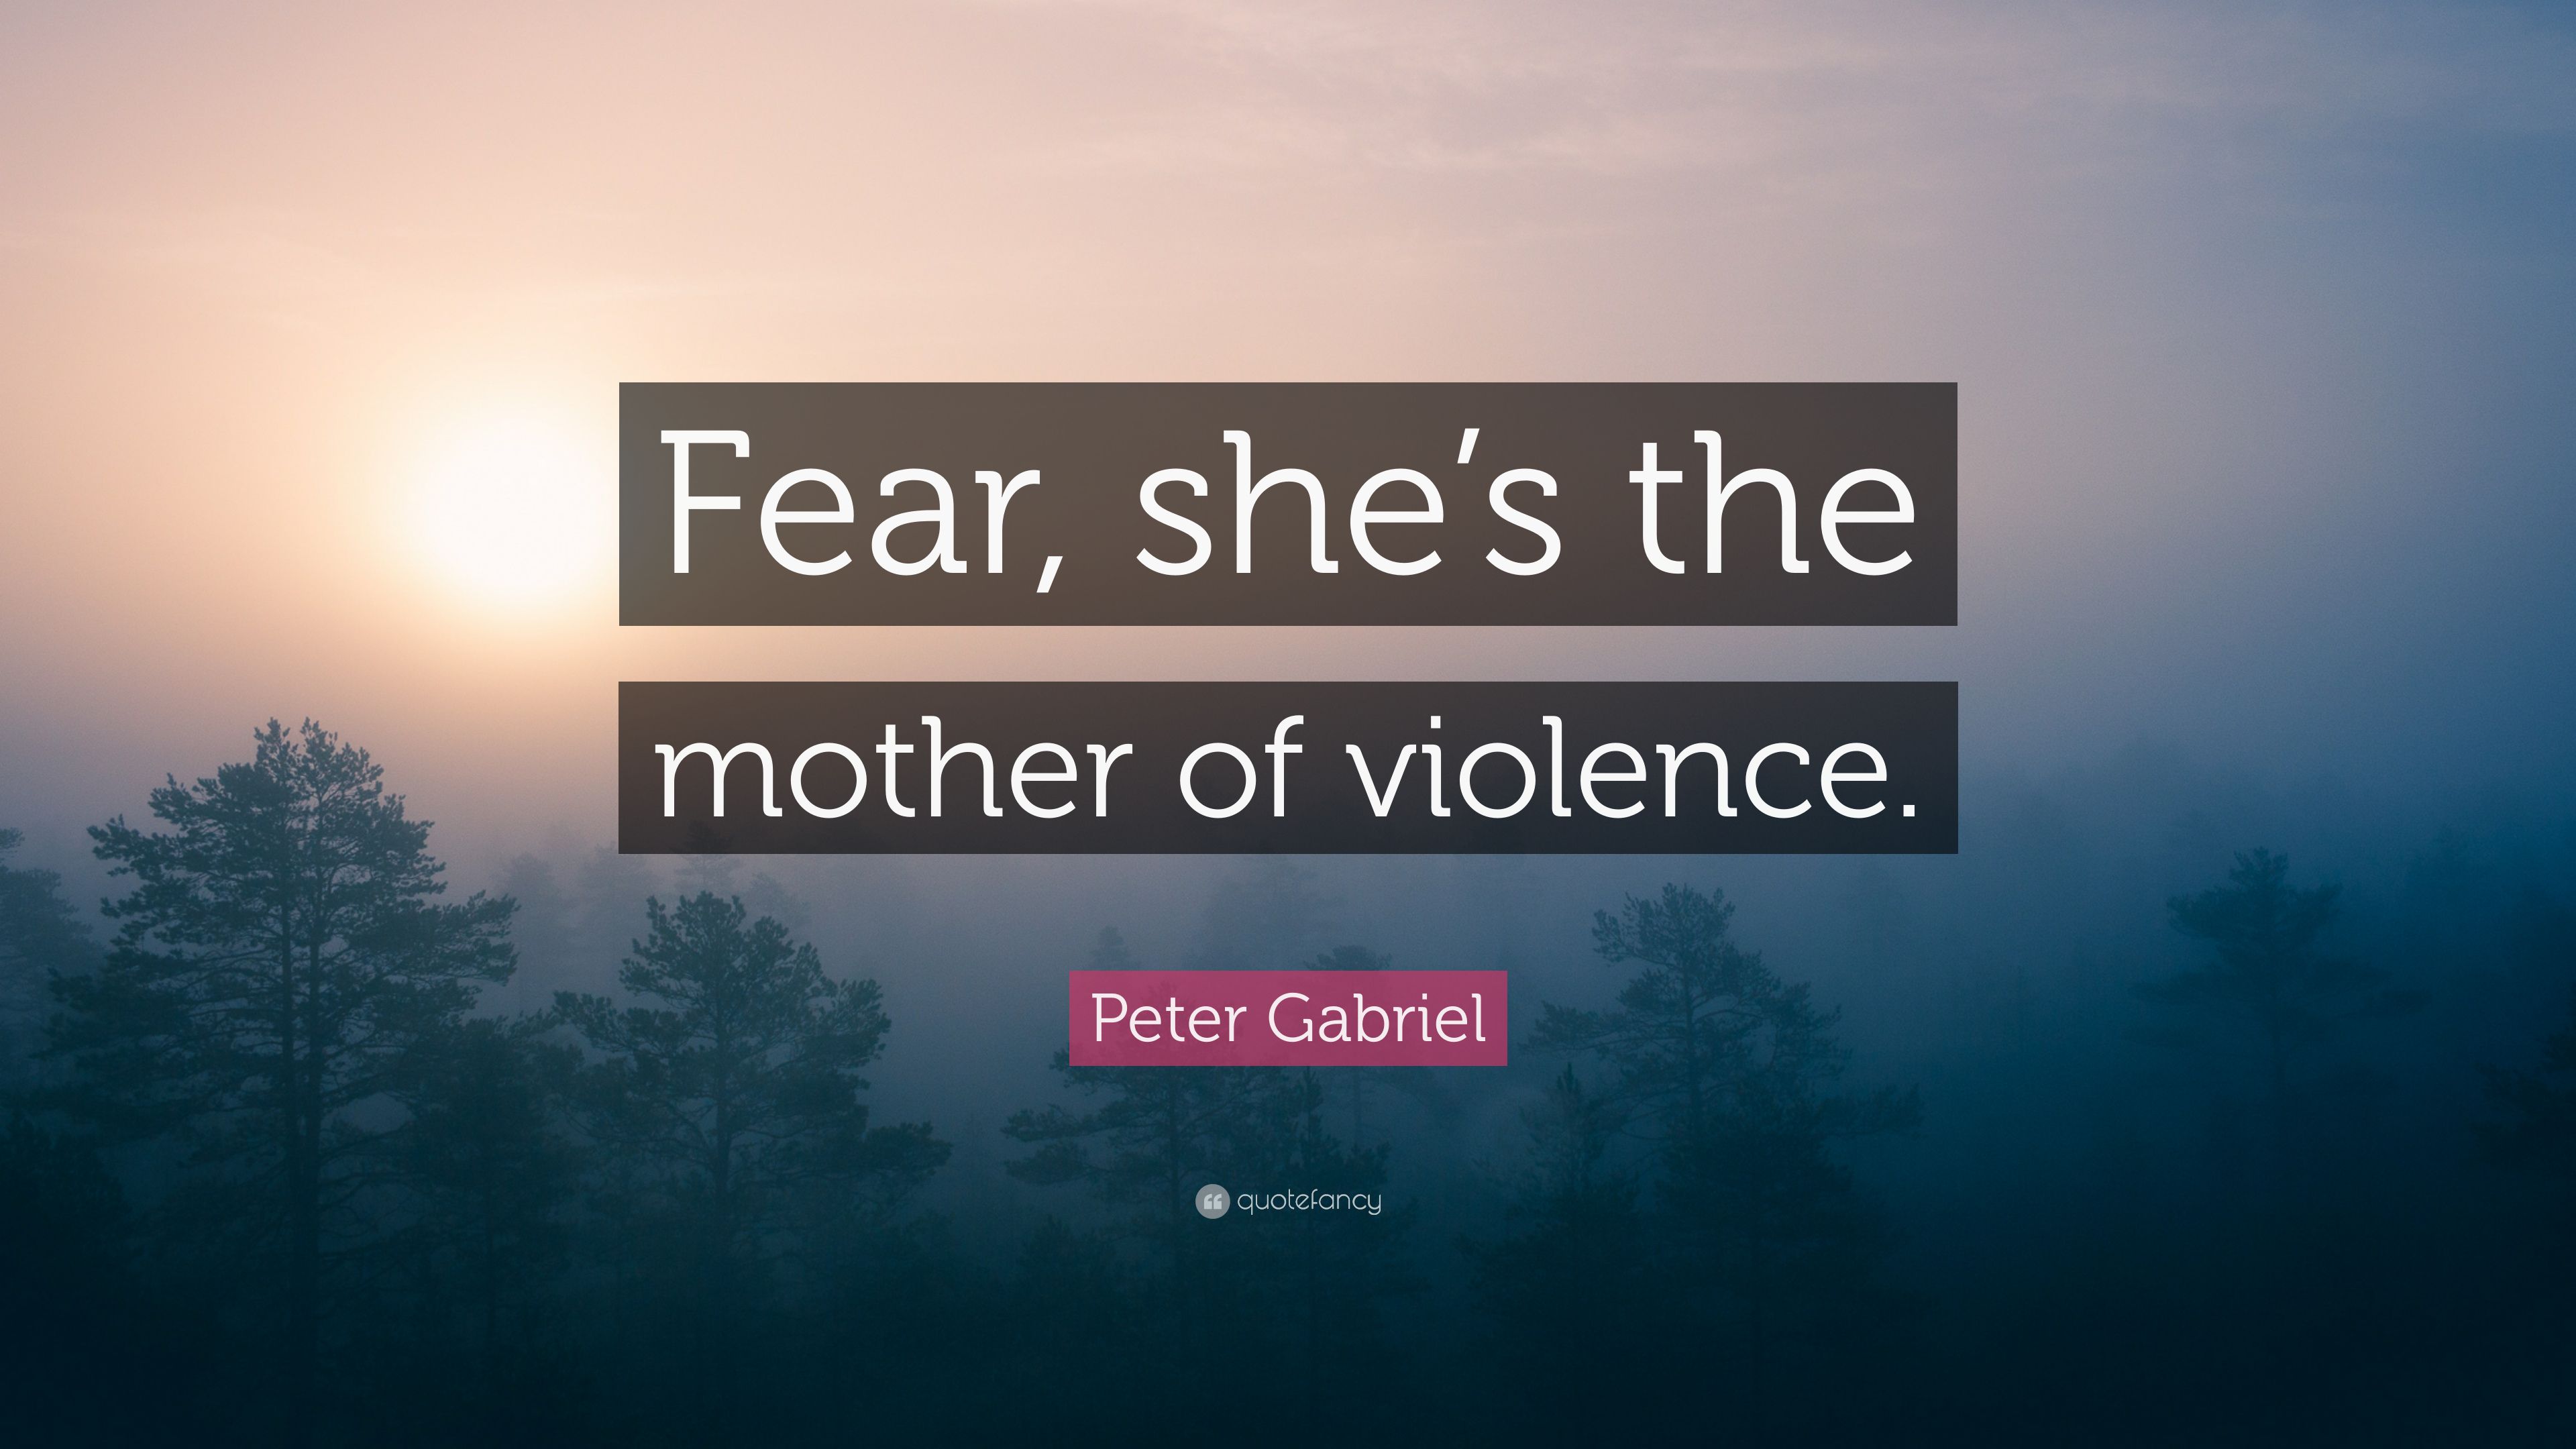 Peter Gabriel Quote: “Fear, she's the mother of violence.” 12